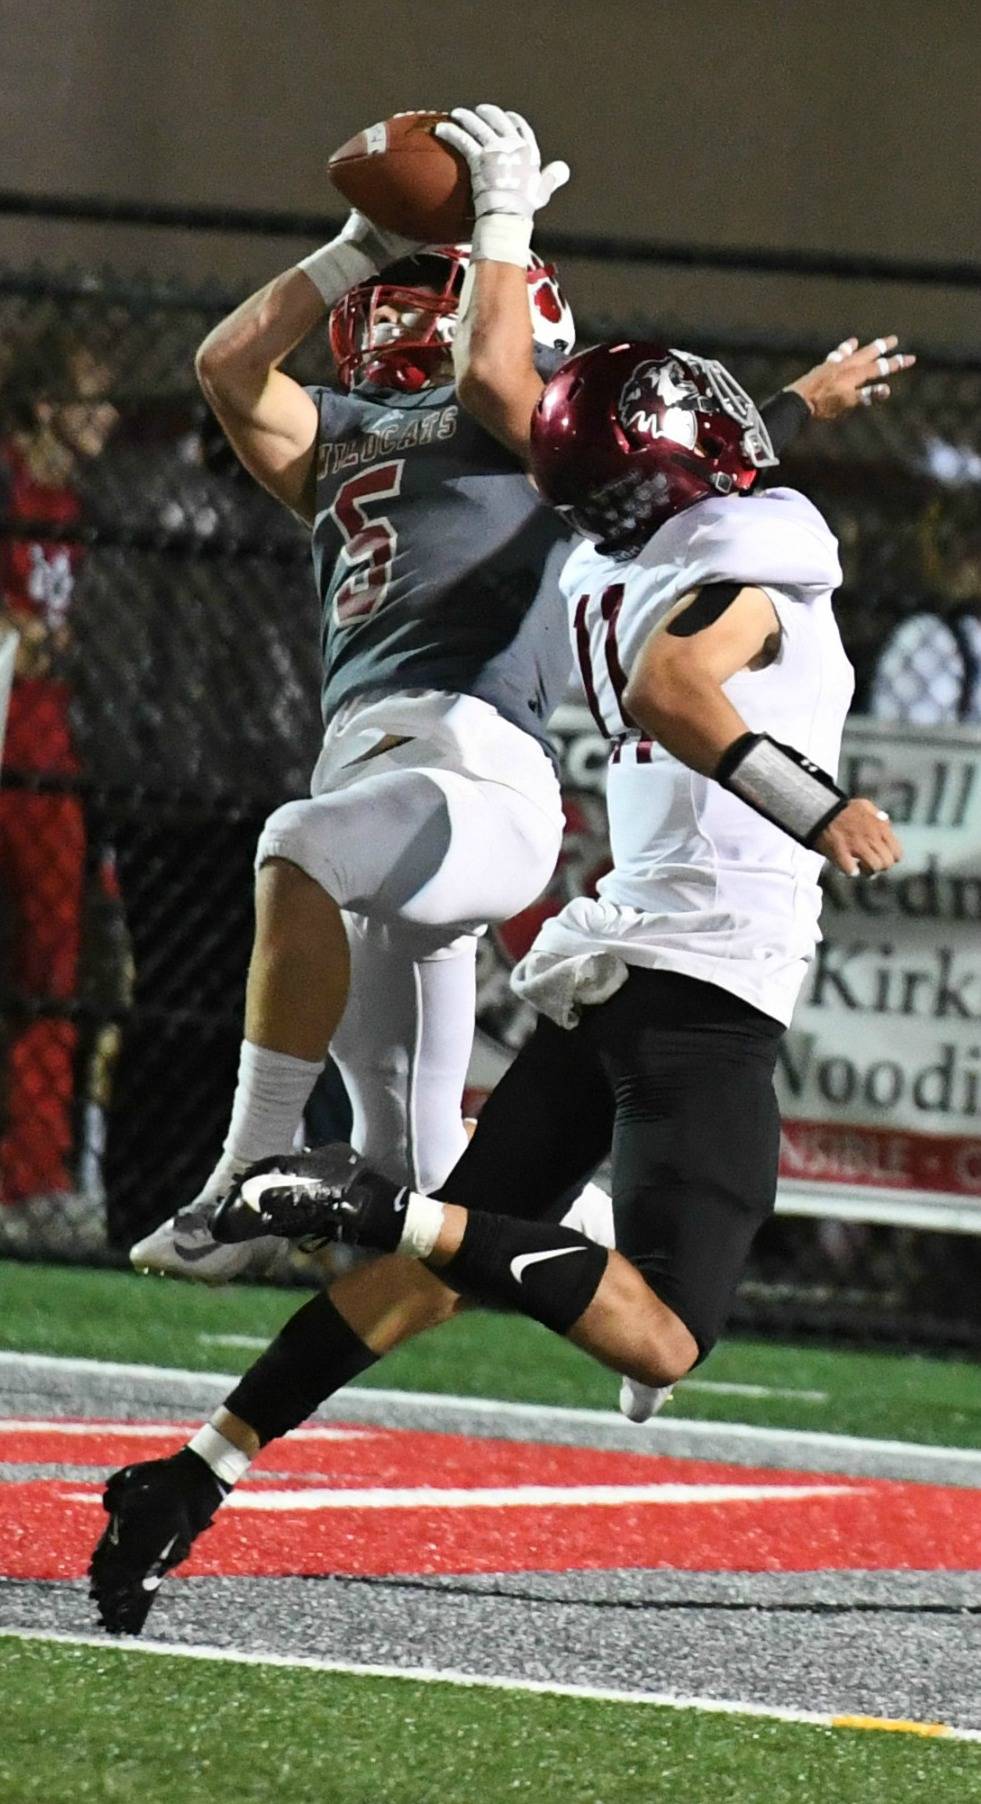 Mount Si’s Colby Botten hauls in a touchdown pass on Friday night. Photo courtesy of Calder Productions